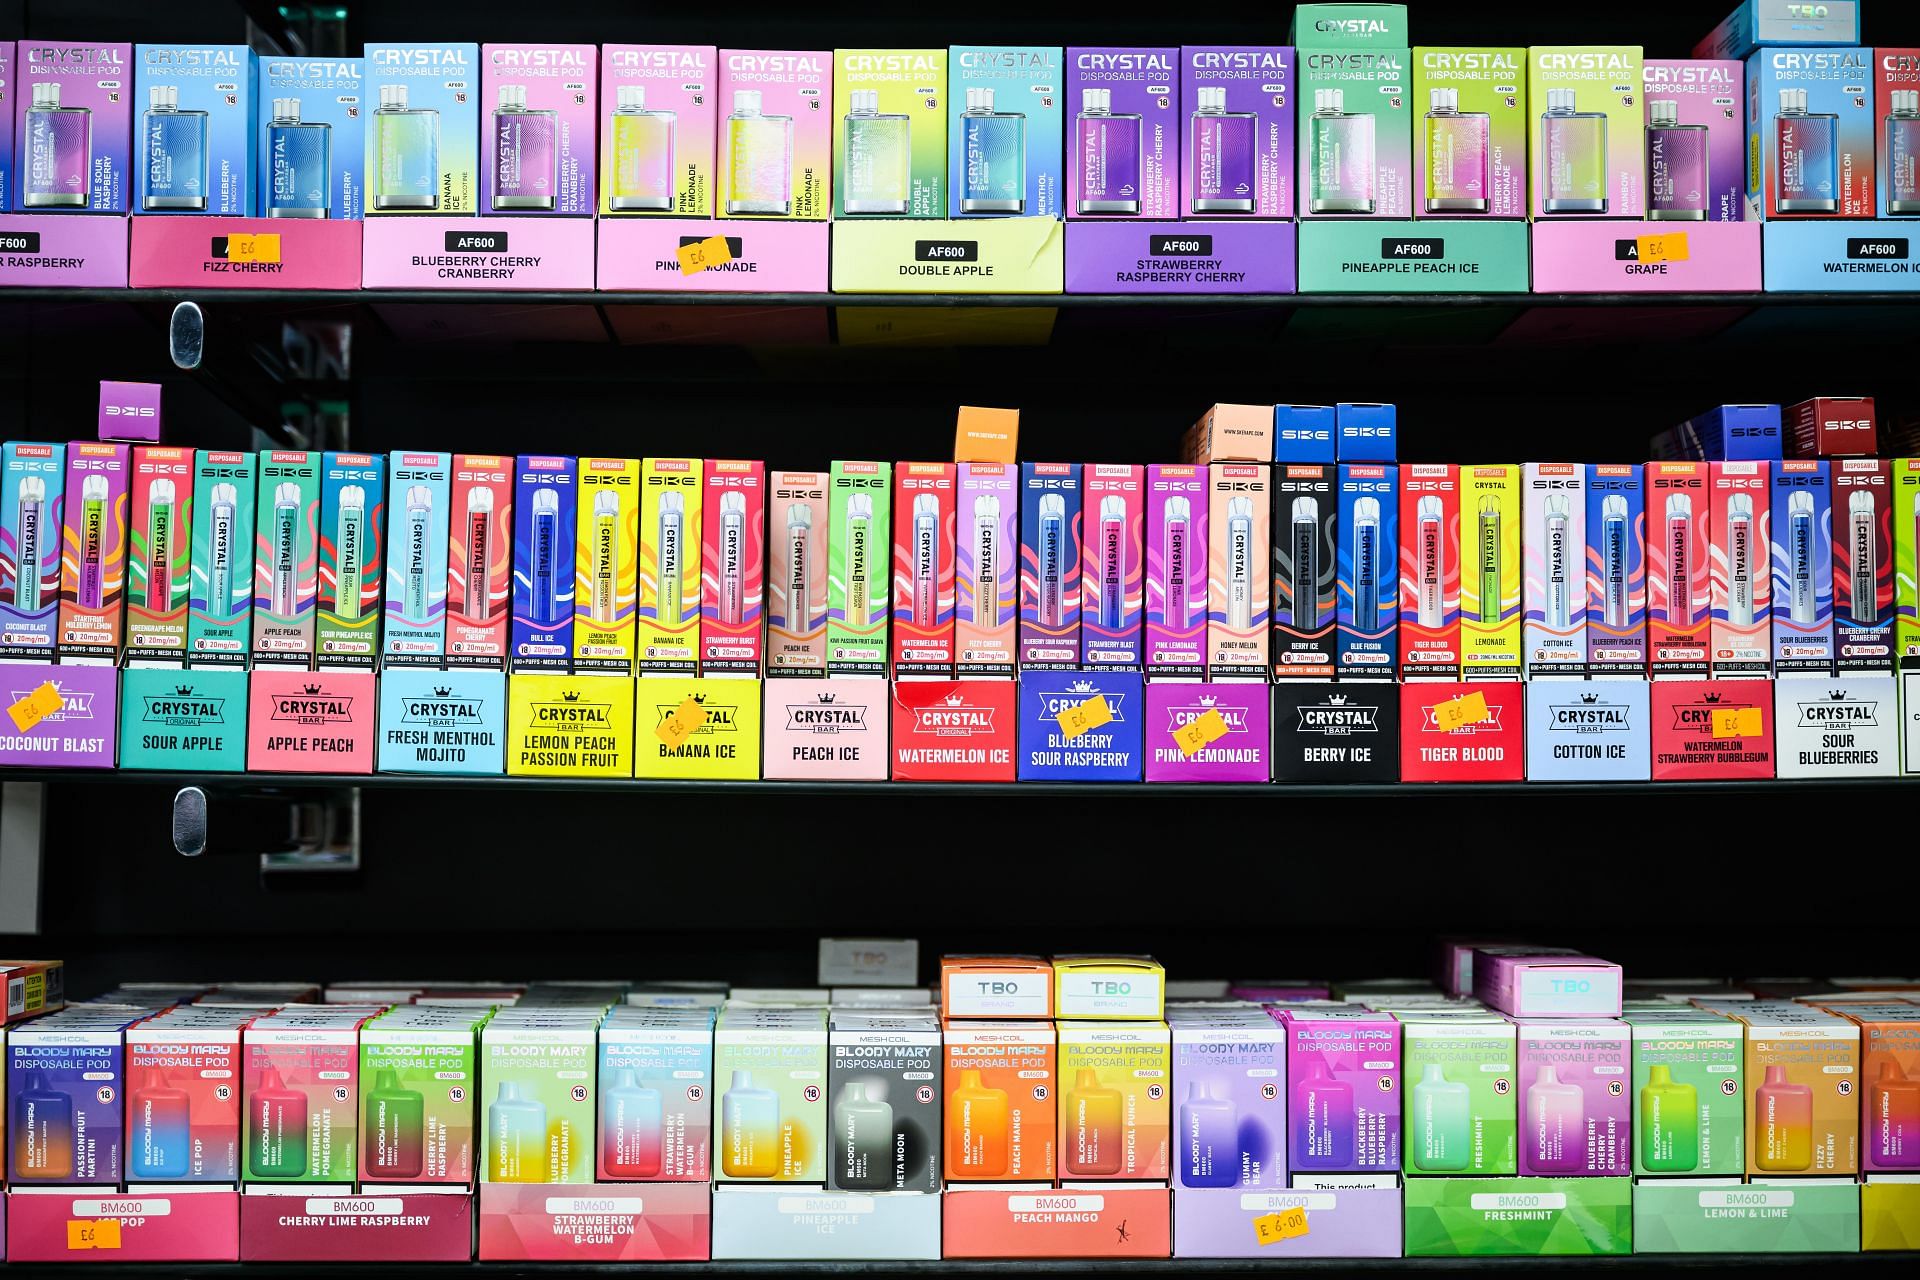 A representative image of colorful vape packs being sold in the UK (Image via Getty)